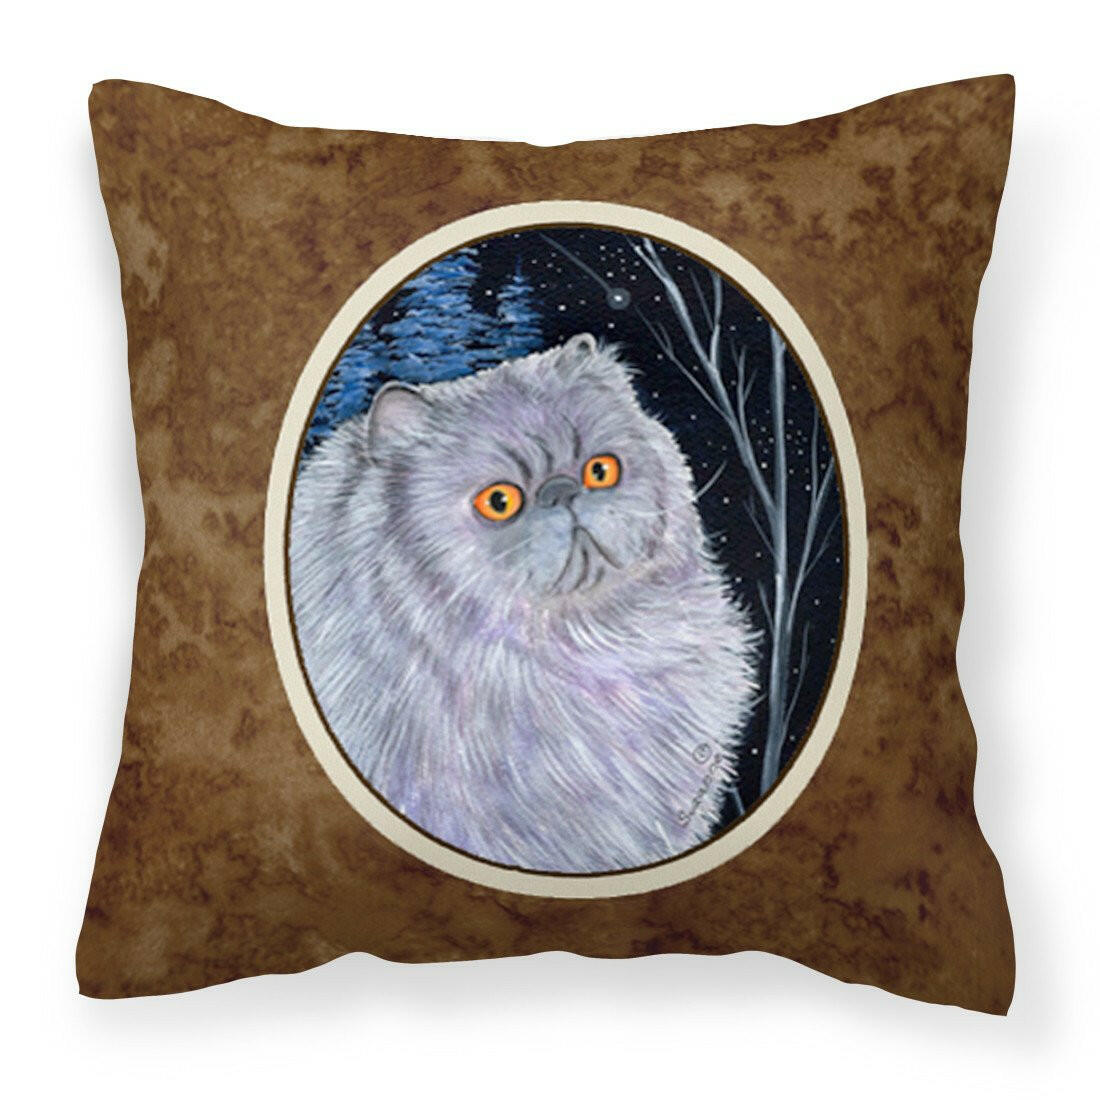 Starry Night Cat - Persian Fabric Decorative Pillow SS8402PW1414 by Caroline's Treasures